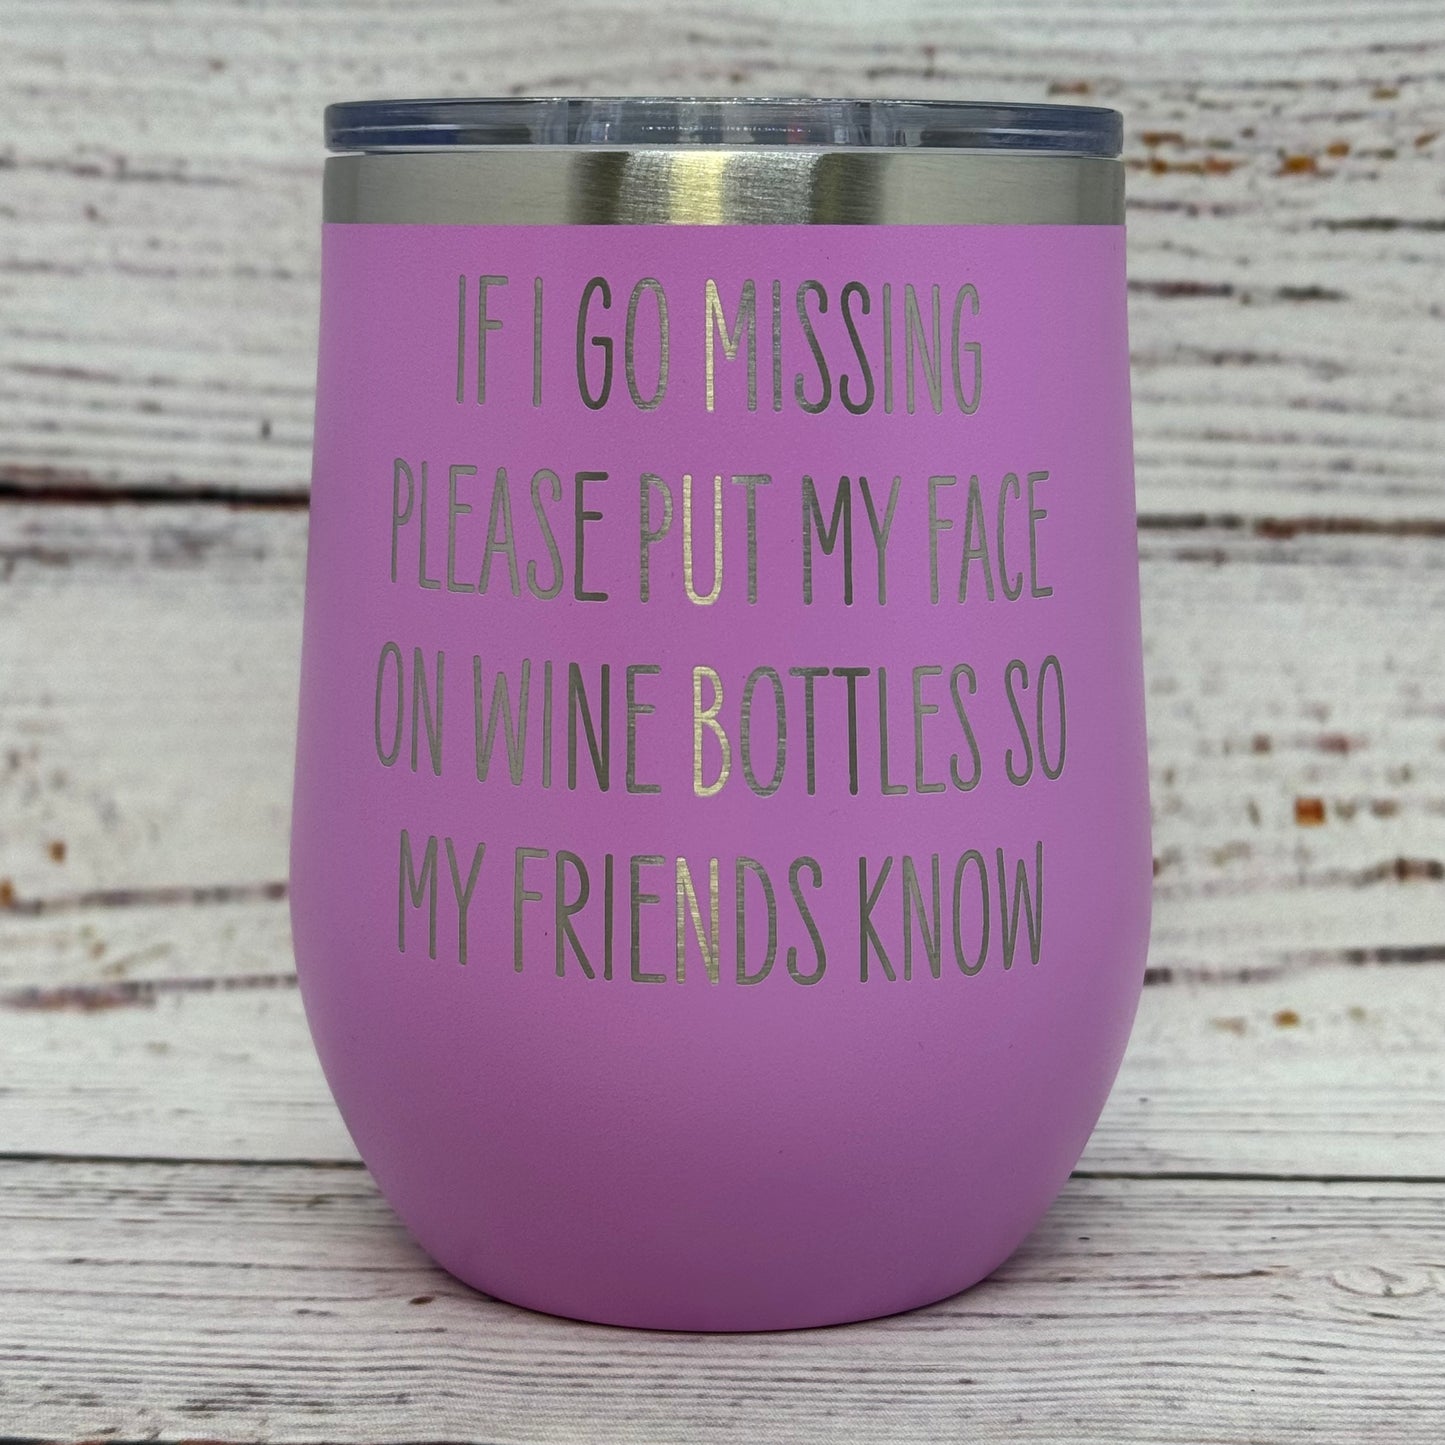 If I Go Missing Please Put My Face On Wine Bottles So My Friends Know 12 oz. Stainless Steel Stemless Wine Glass